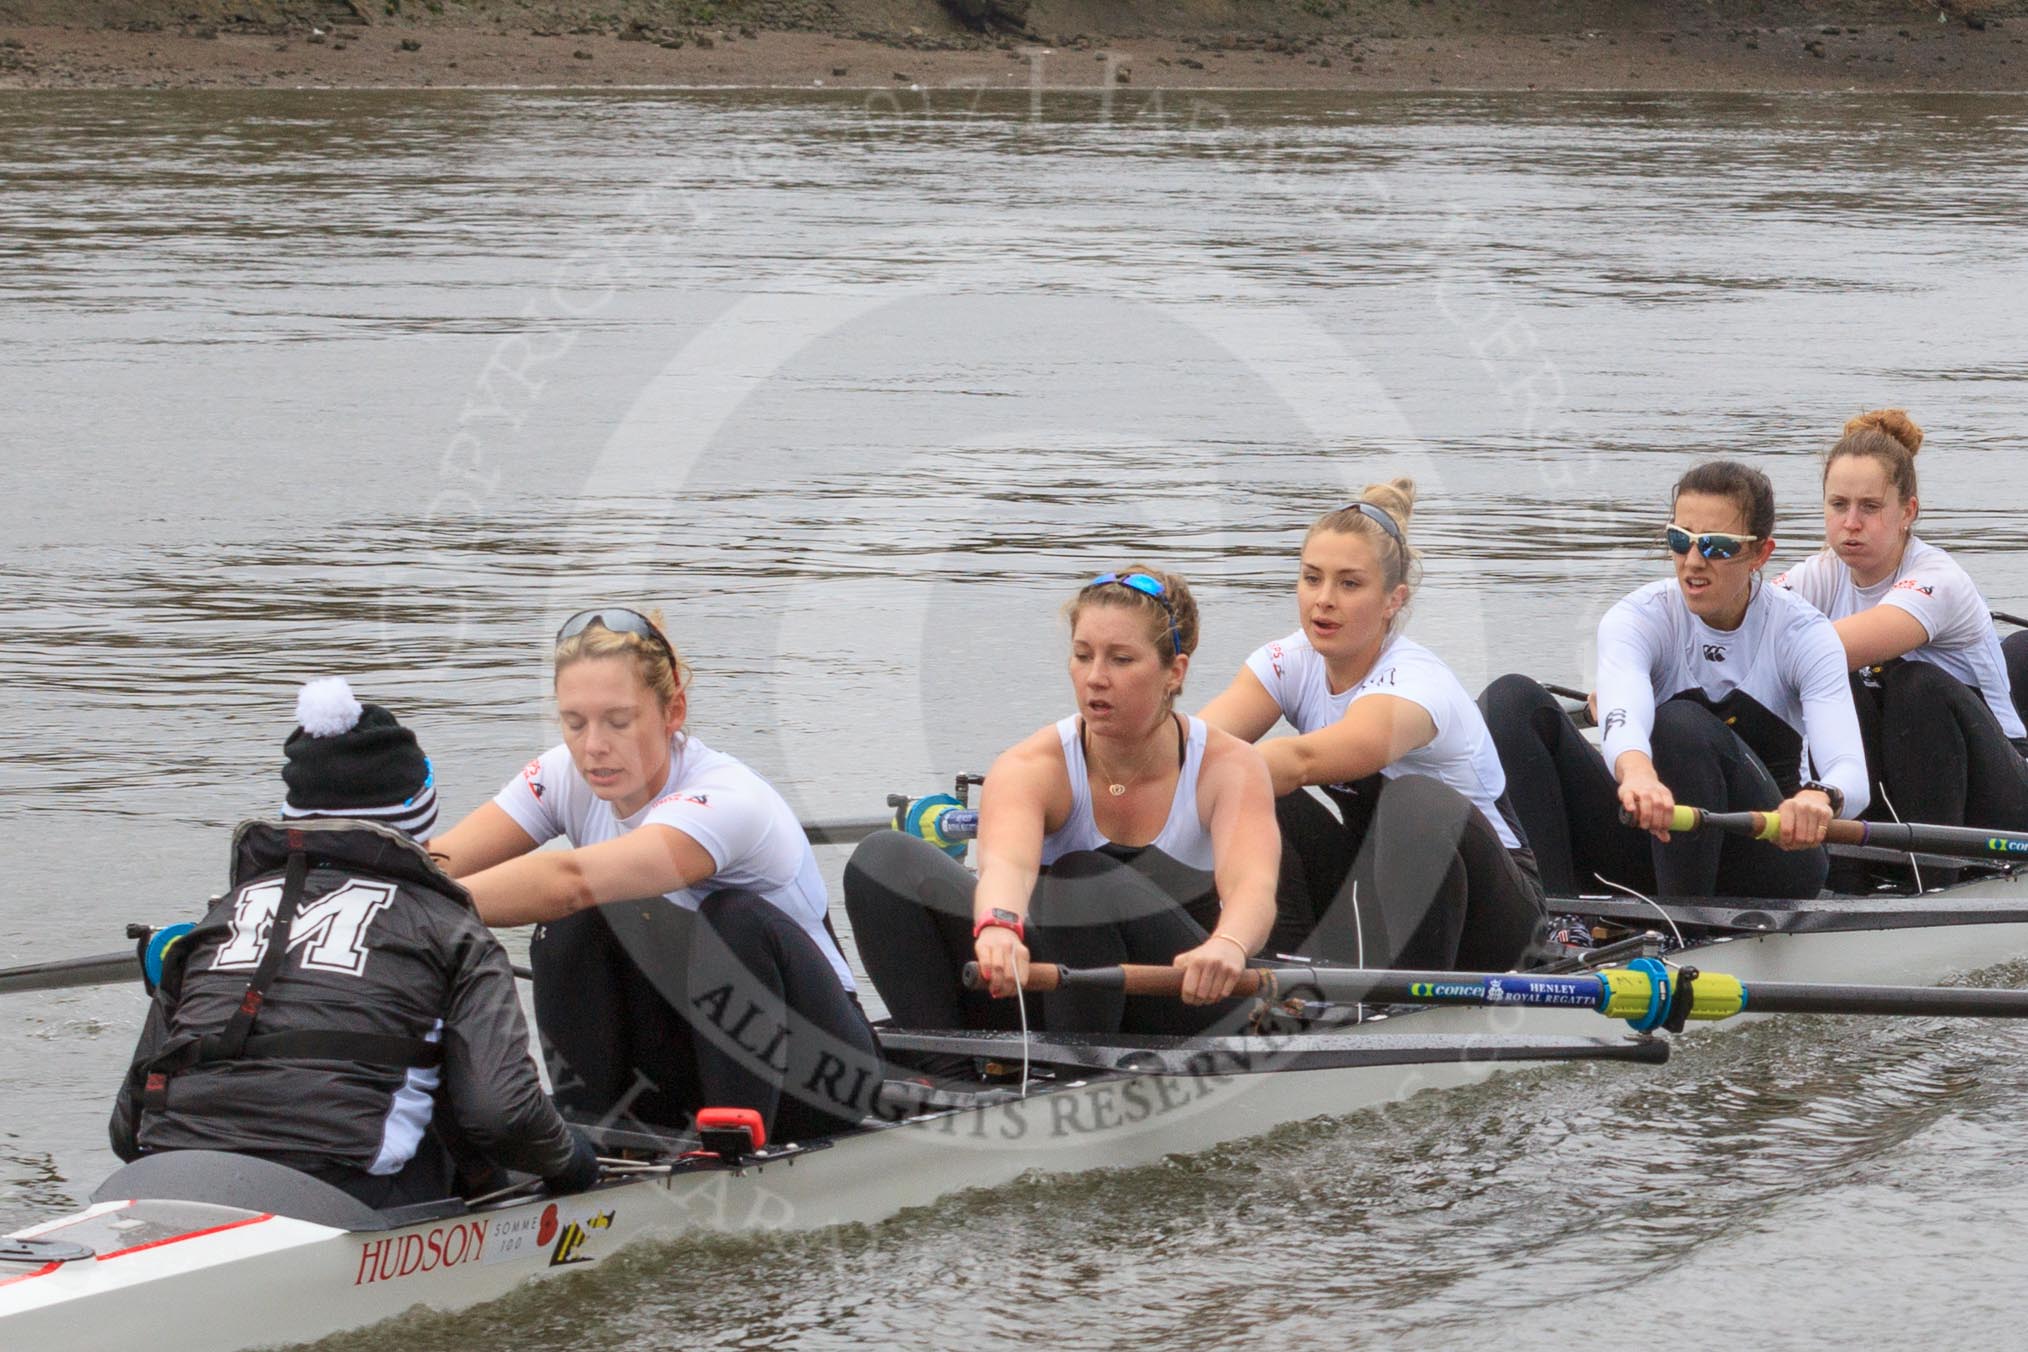 The Women's Boat Race season 2018 - fixture OUWBC vs. Molesey BC: The Molesey boat: Cox Ella Taylor, stroke Katie Bartlett, 7 Emma McDonald, 6 Molly Harding, 5 Ruth Whyman, 4 Claire McKeown.
River Thames between Putney Bridge and Mortlake,
London SW15,

United Kingdom,
on 04 March 2018 at 13:48, image #67